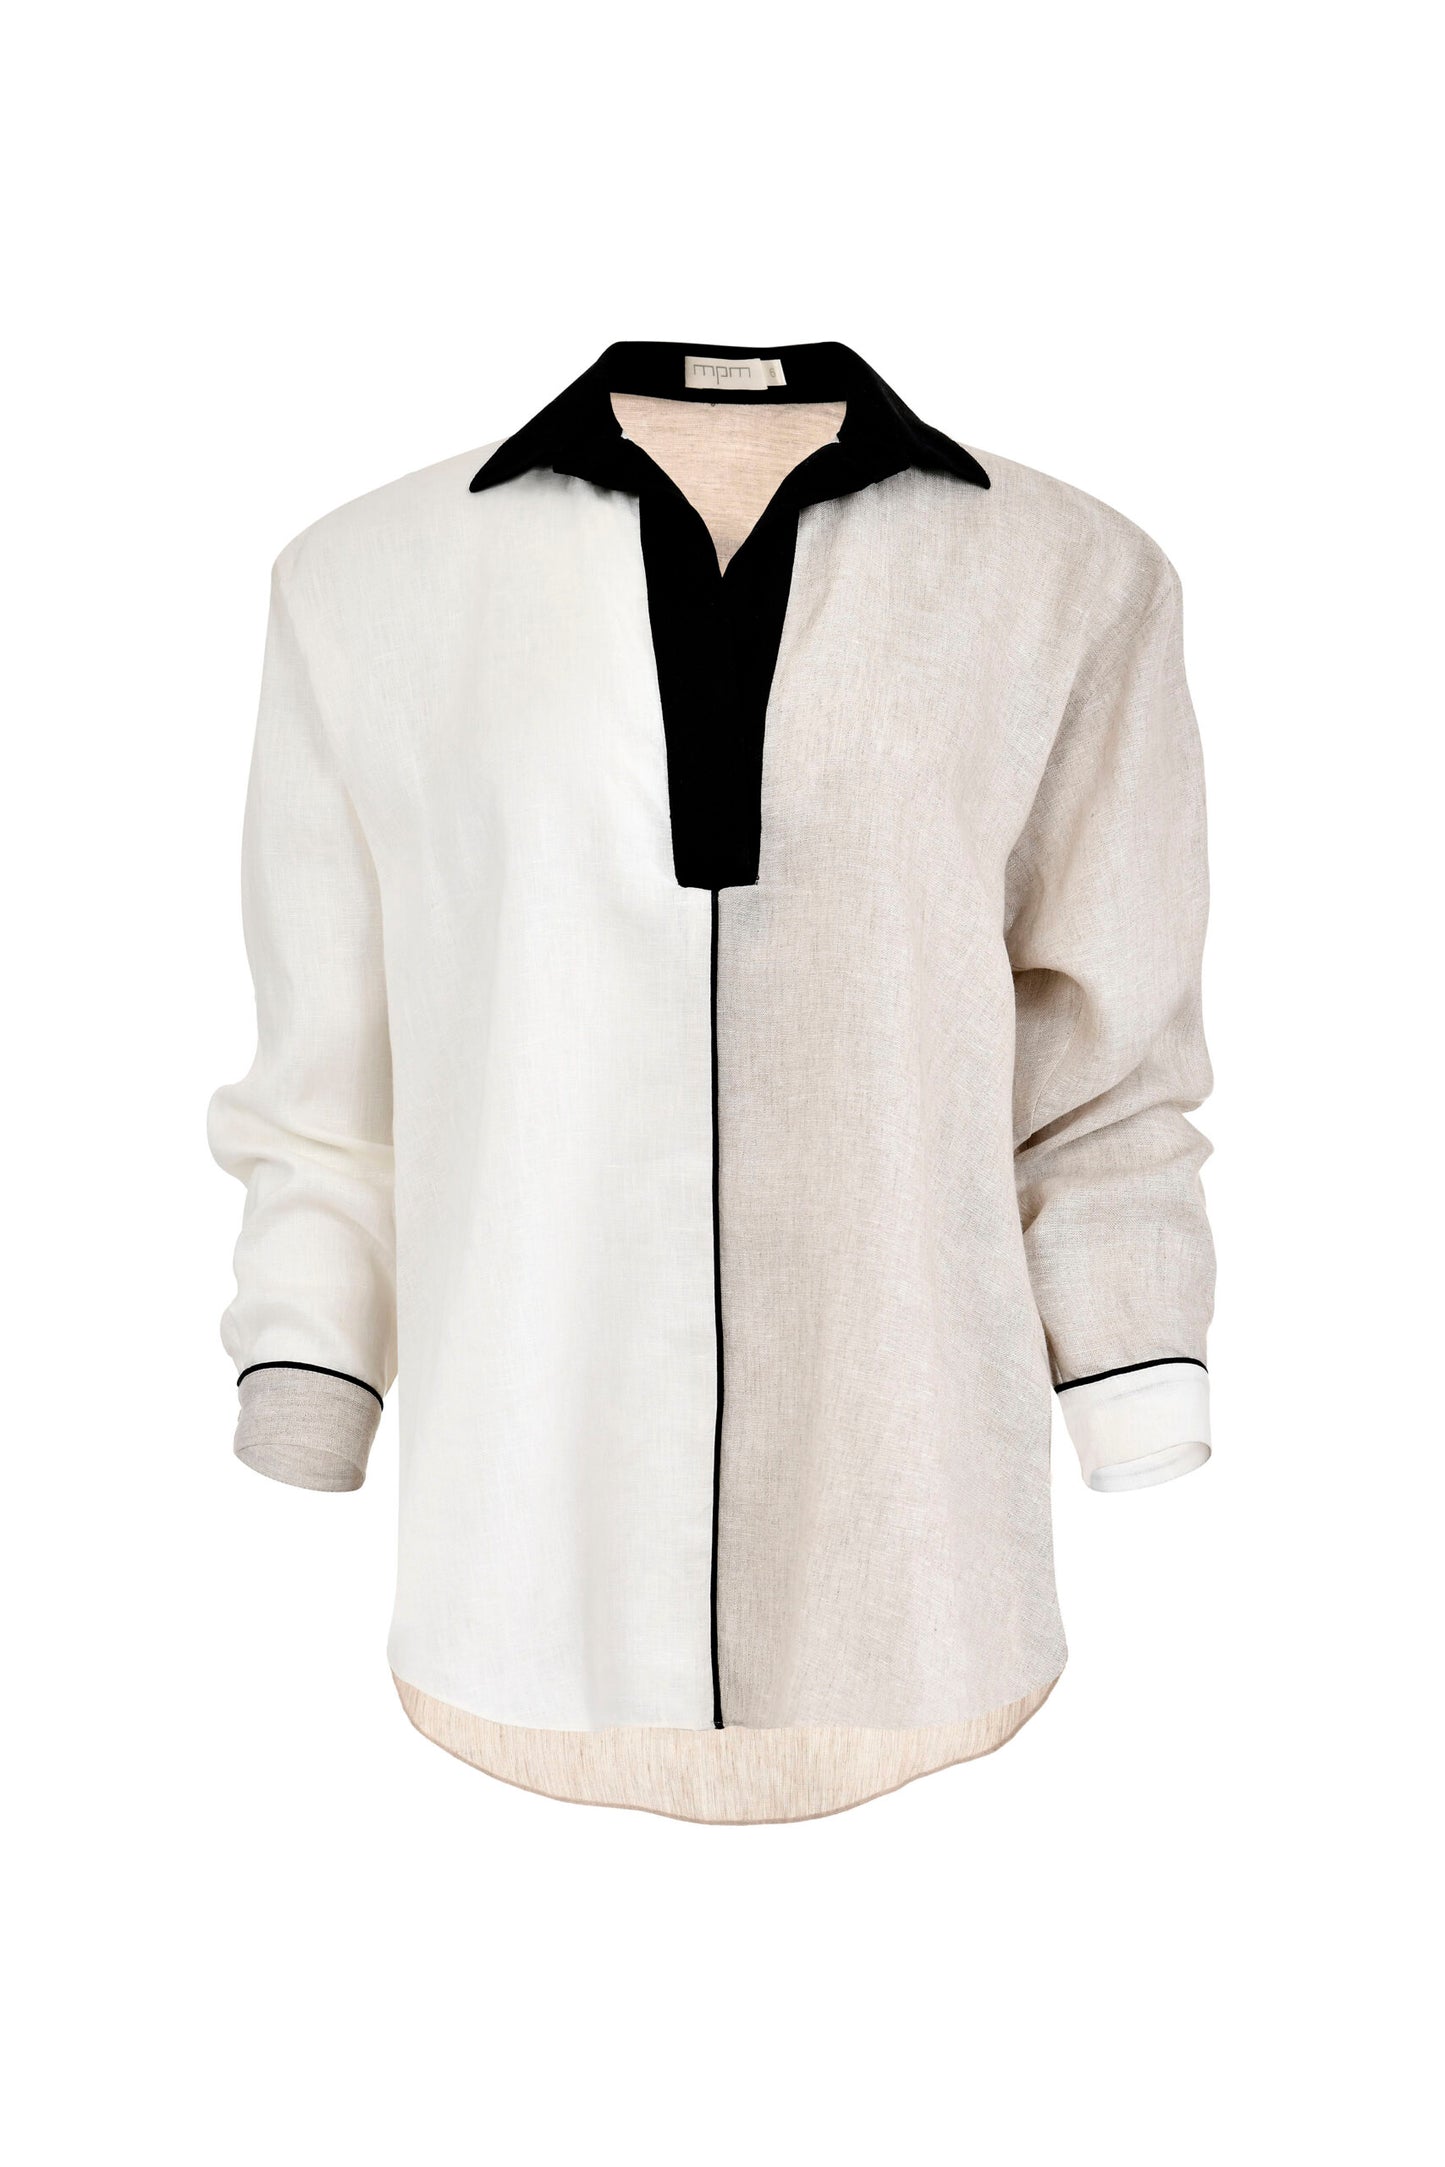 Aries Blouse